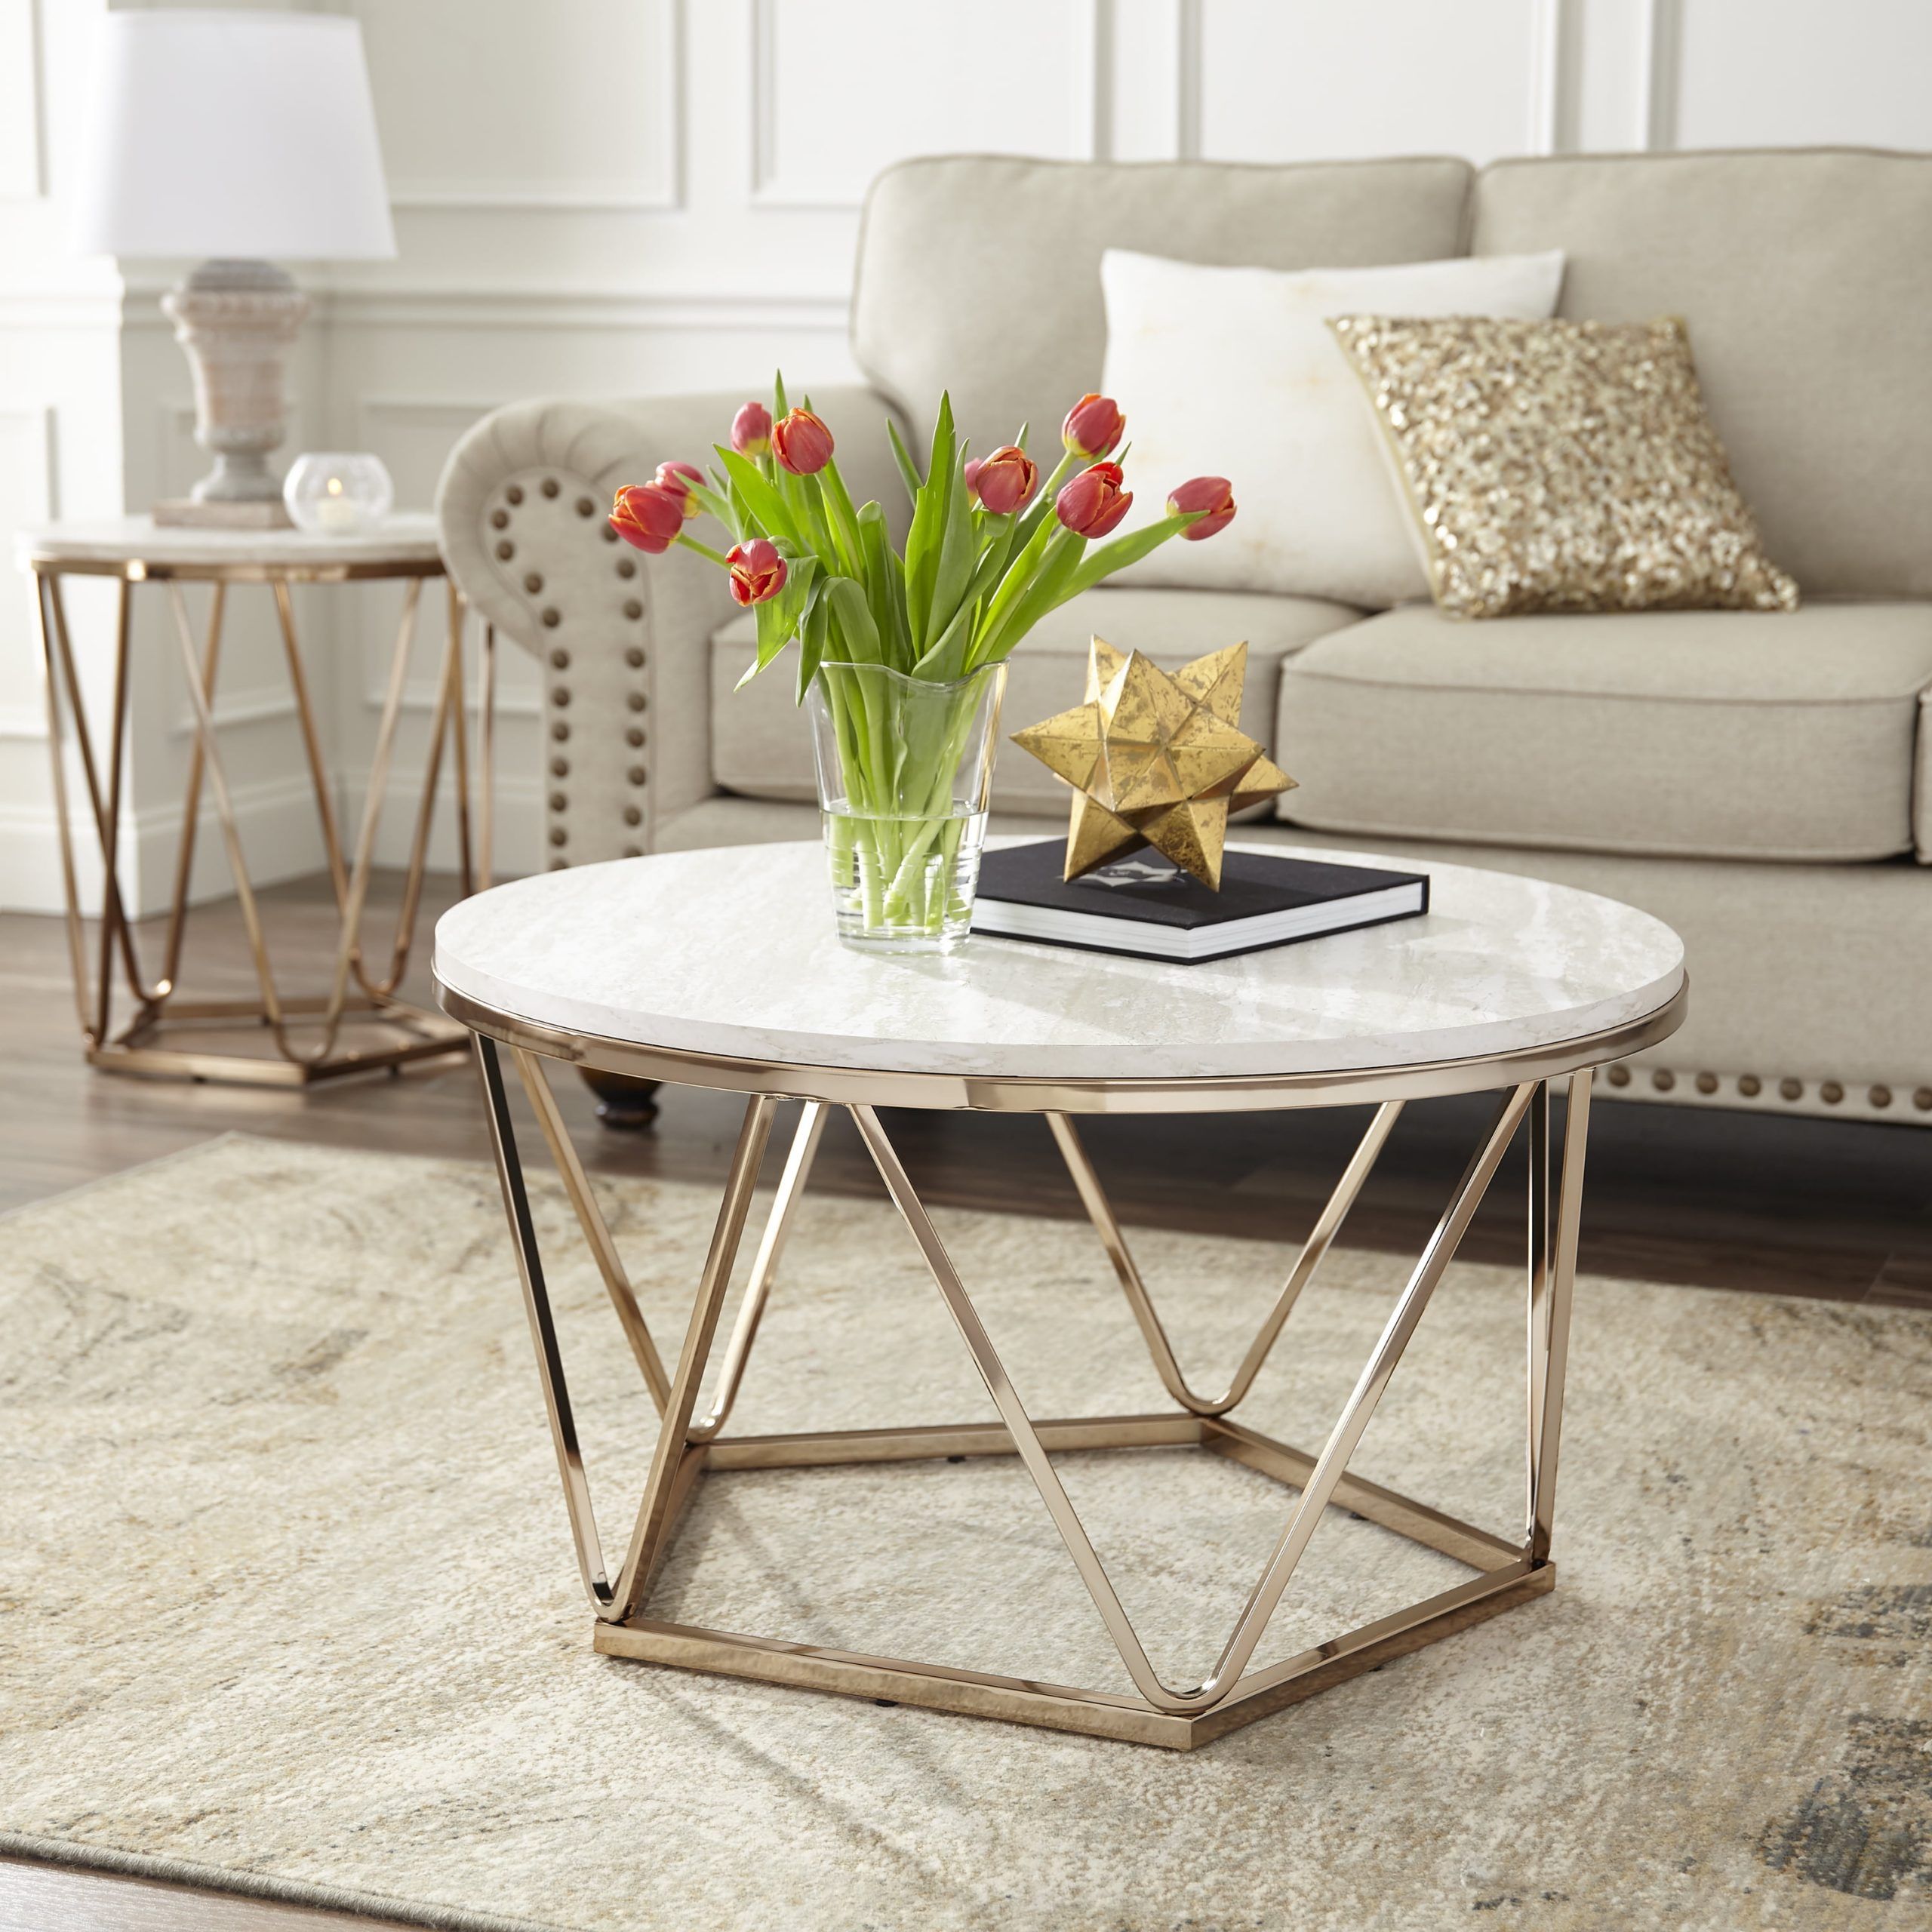 Modern Round Faux Marble Coffee Tables Regarding Trendy Leaci Modern Faux Stone Round Coffee Table – Walmart (View 15 of 15)